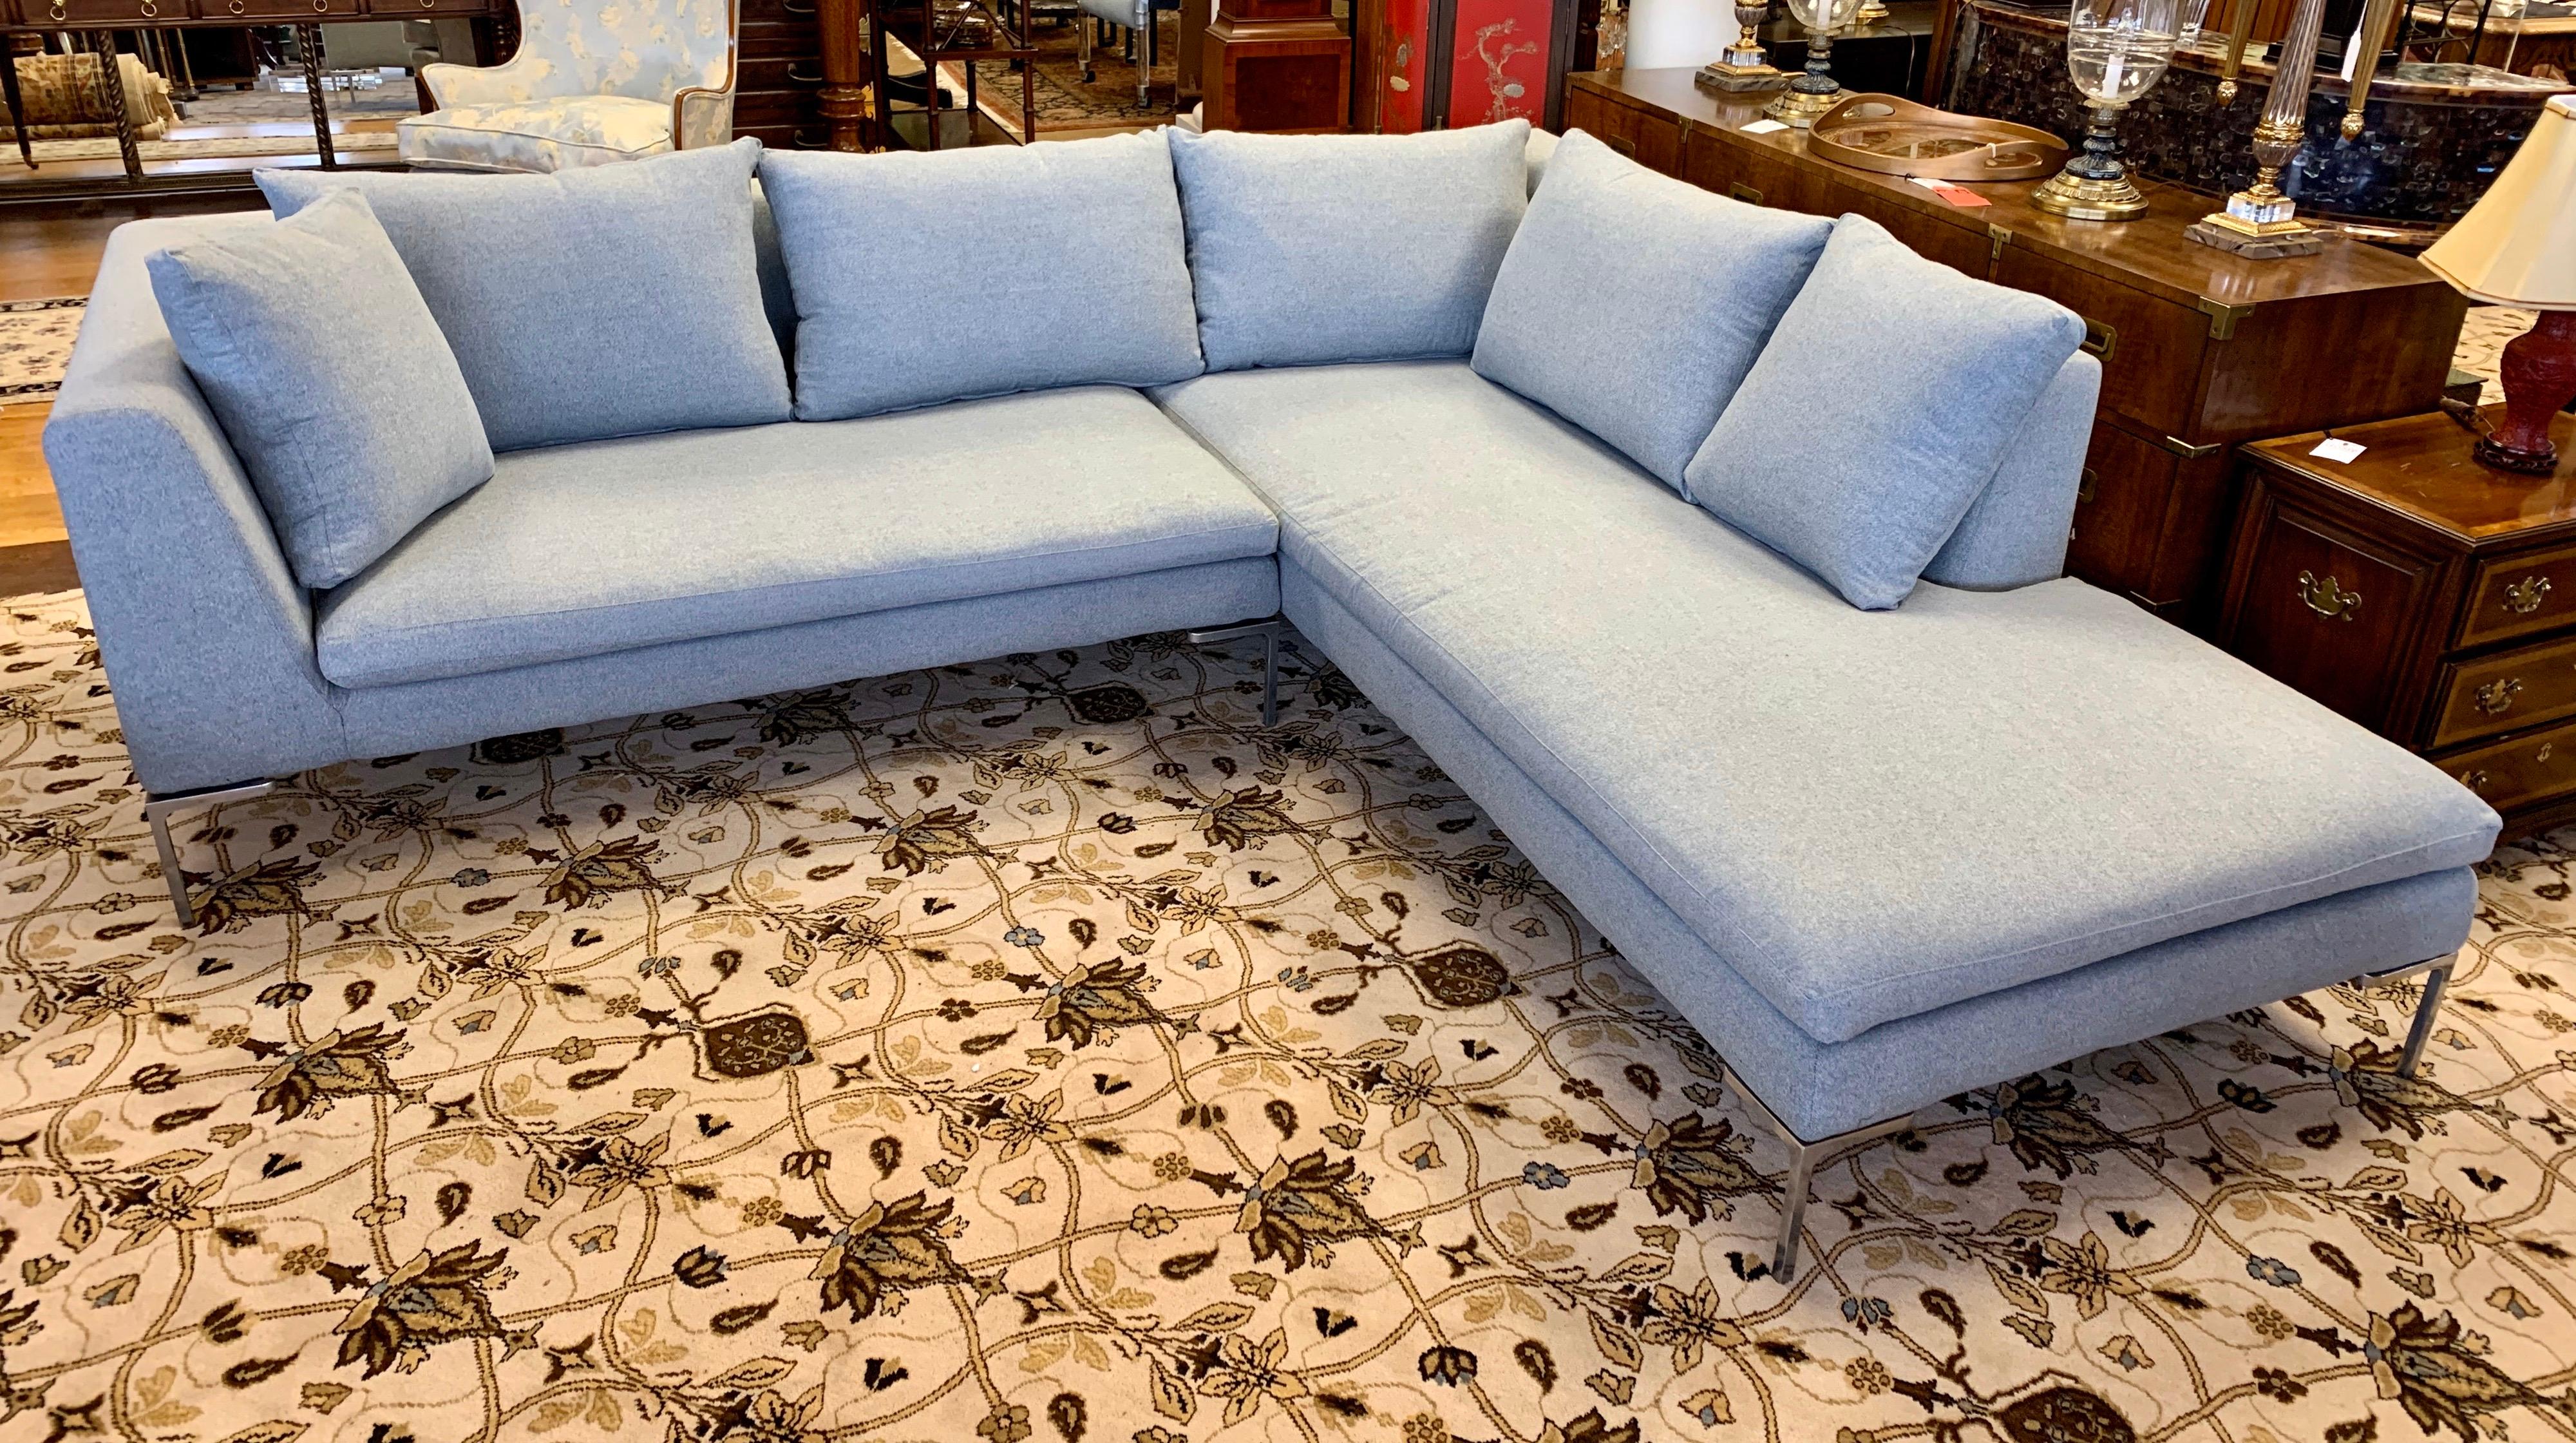 Elegant, signed B&B Italia sectional sofa with brand new upholstery done is a light gray tone with a hint of blue undertone. This is the coveted Charles style sectional sofa designed by Antonio Citterio for B&B Italia. It is famous for its airy and